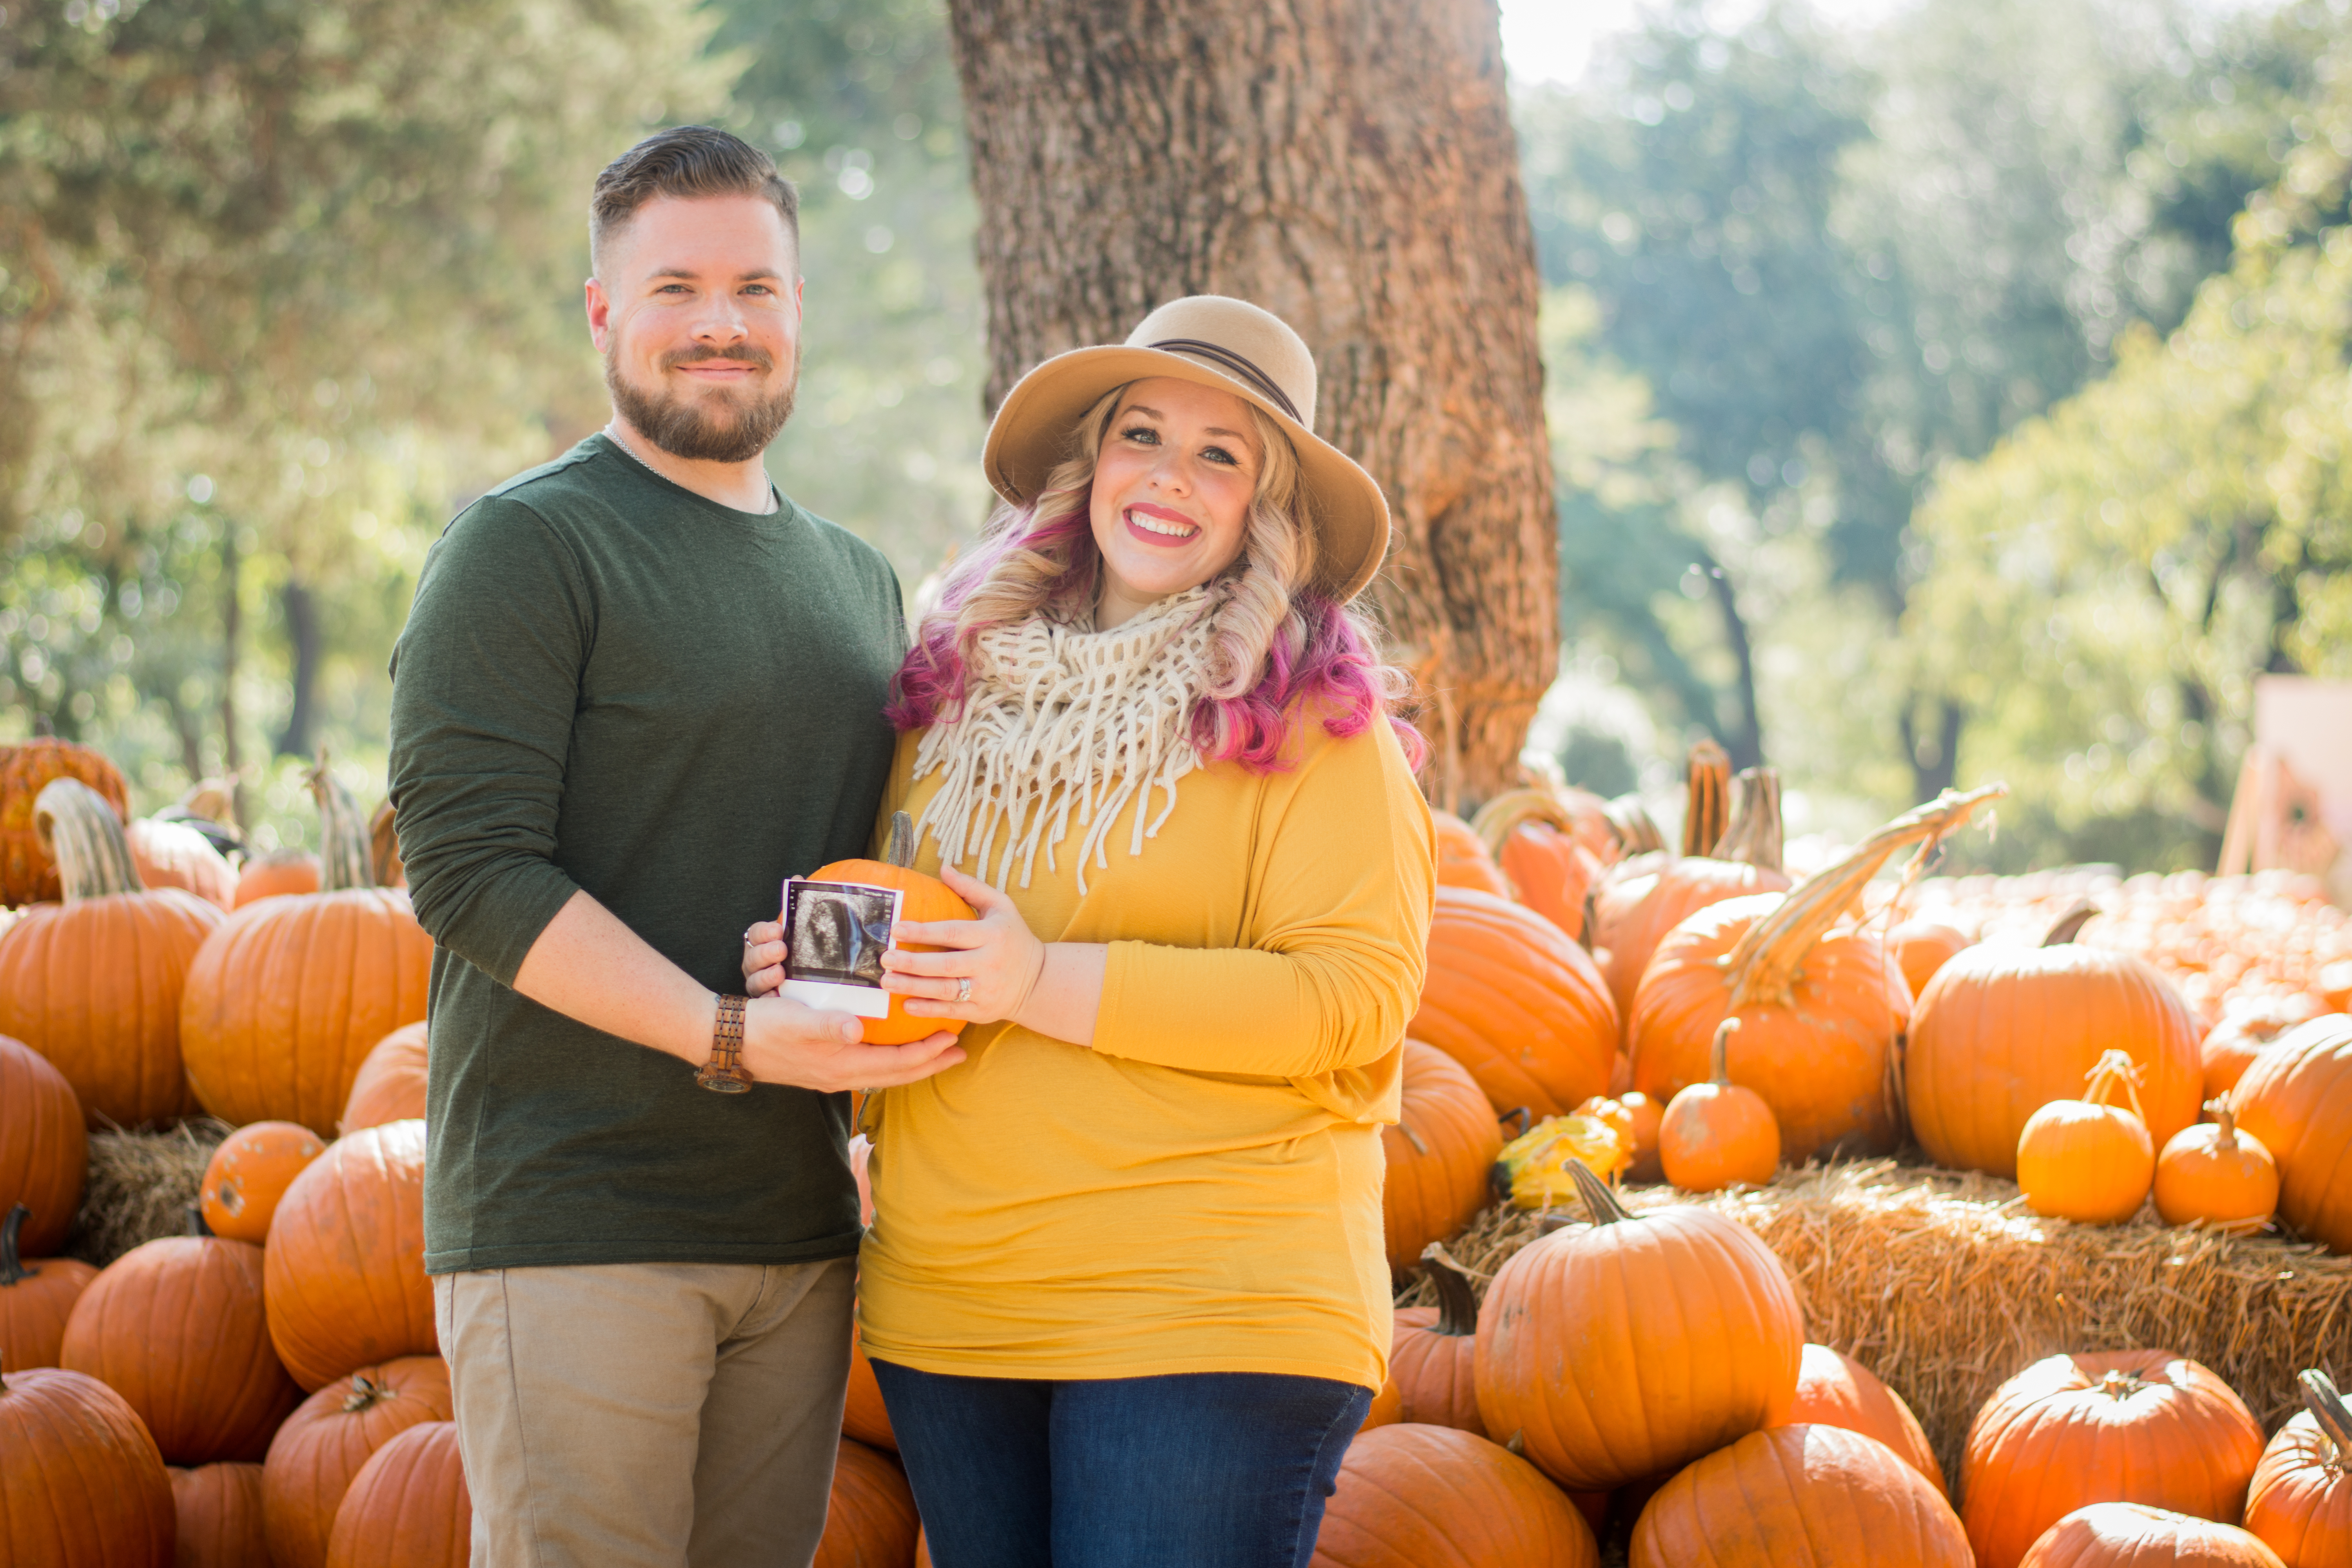 This Fall pregnancy announcement photo shoot is just adorable! Check it out at The Vintage Modern Wife